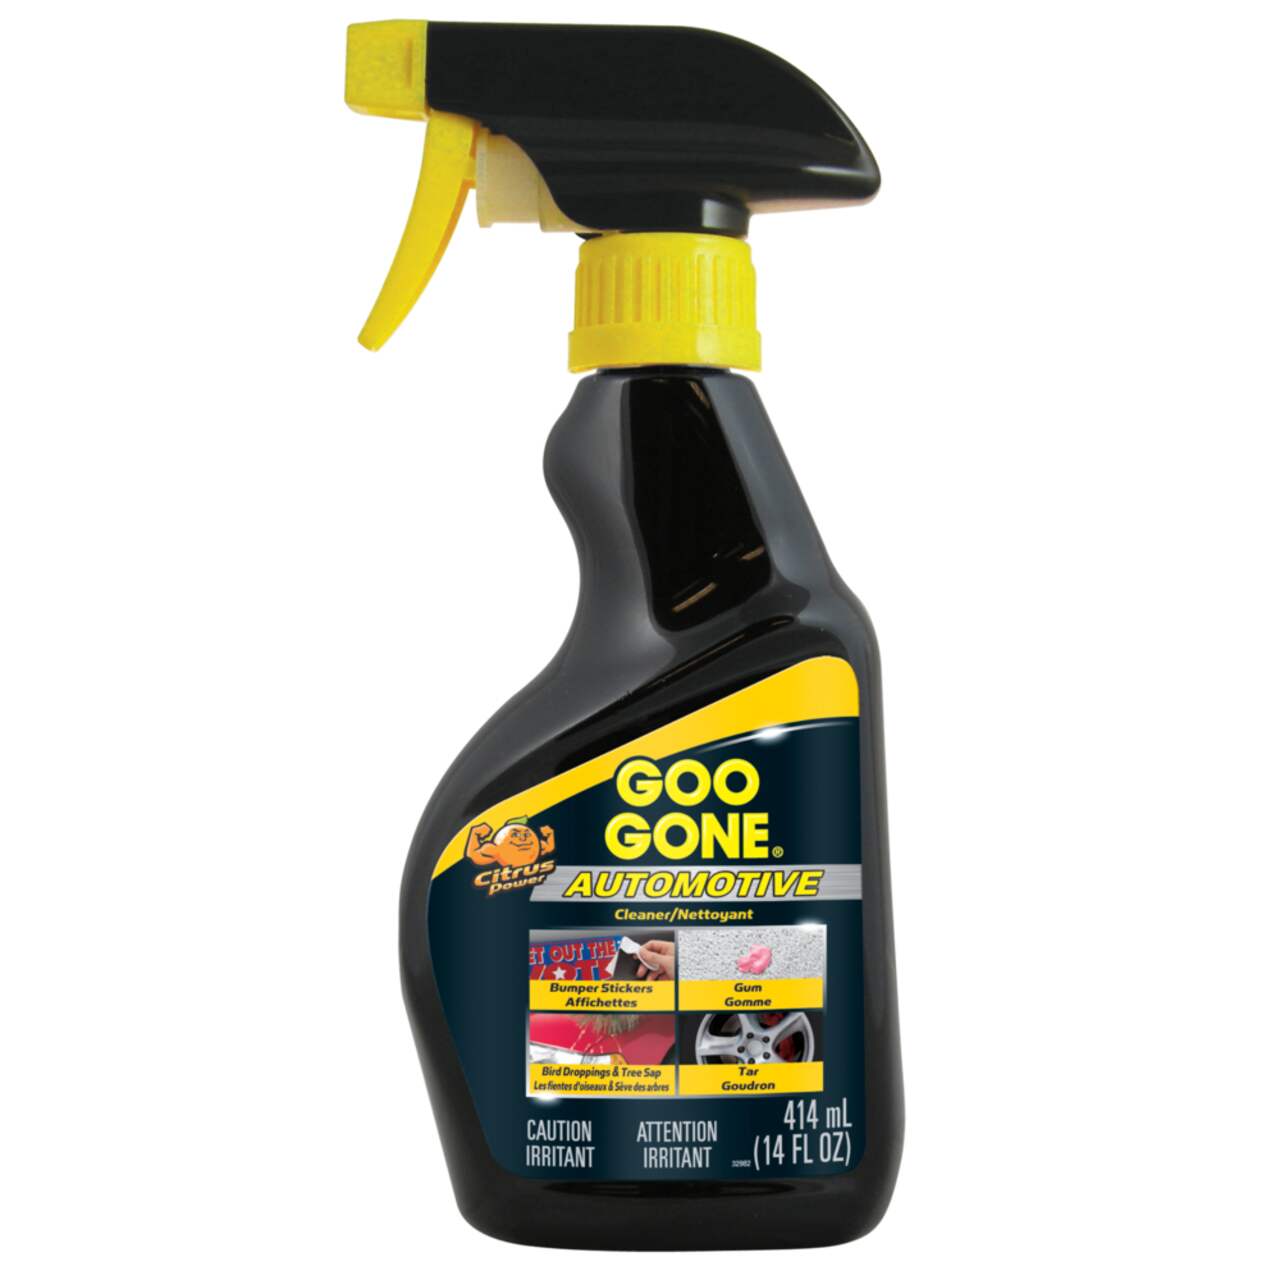 Goo Gone Automotive Goo & Sticker Remover Spray Gel for Cleaning Car  Interior and Exterior (24 oz.) 